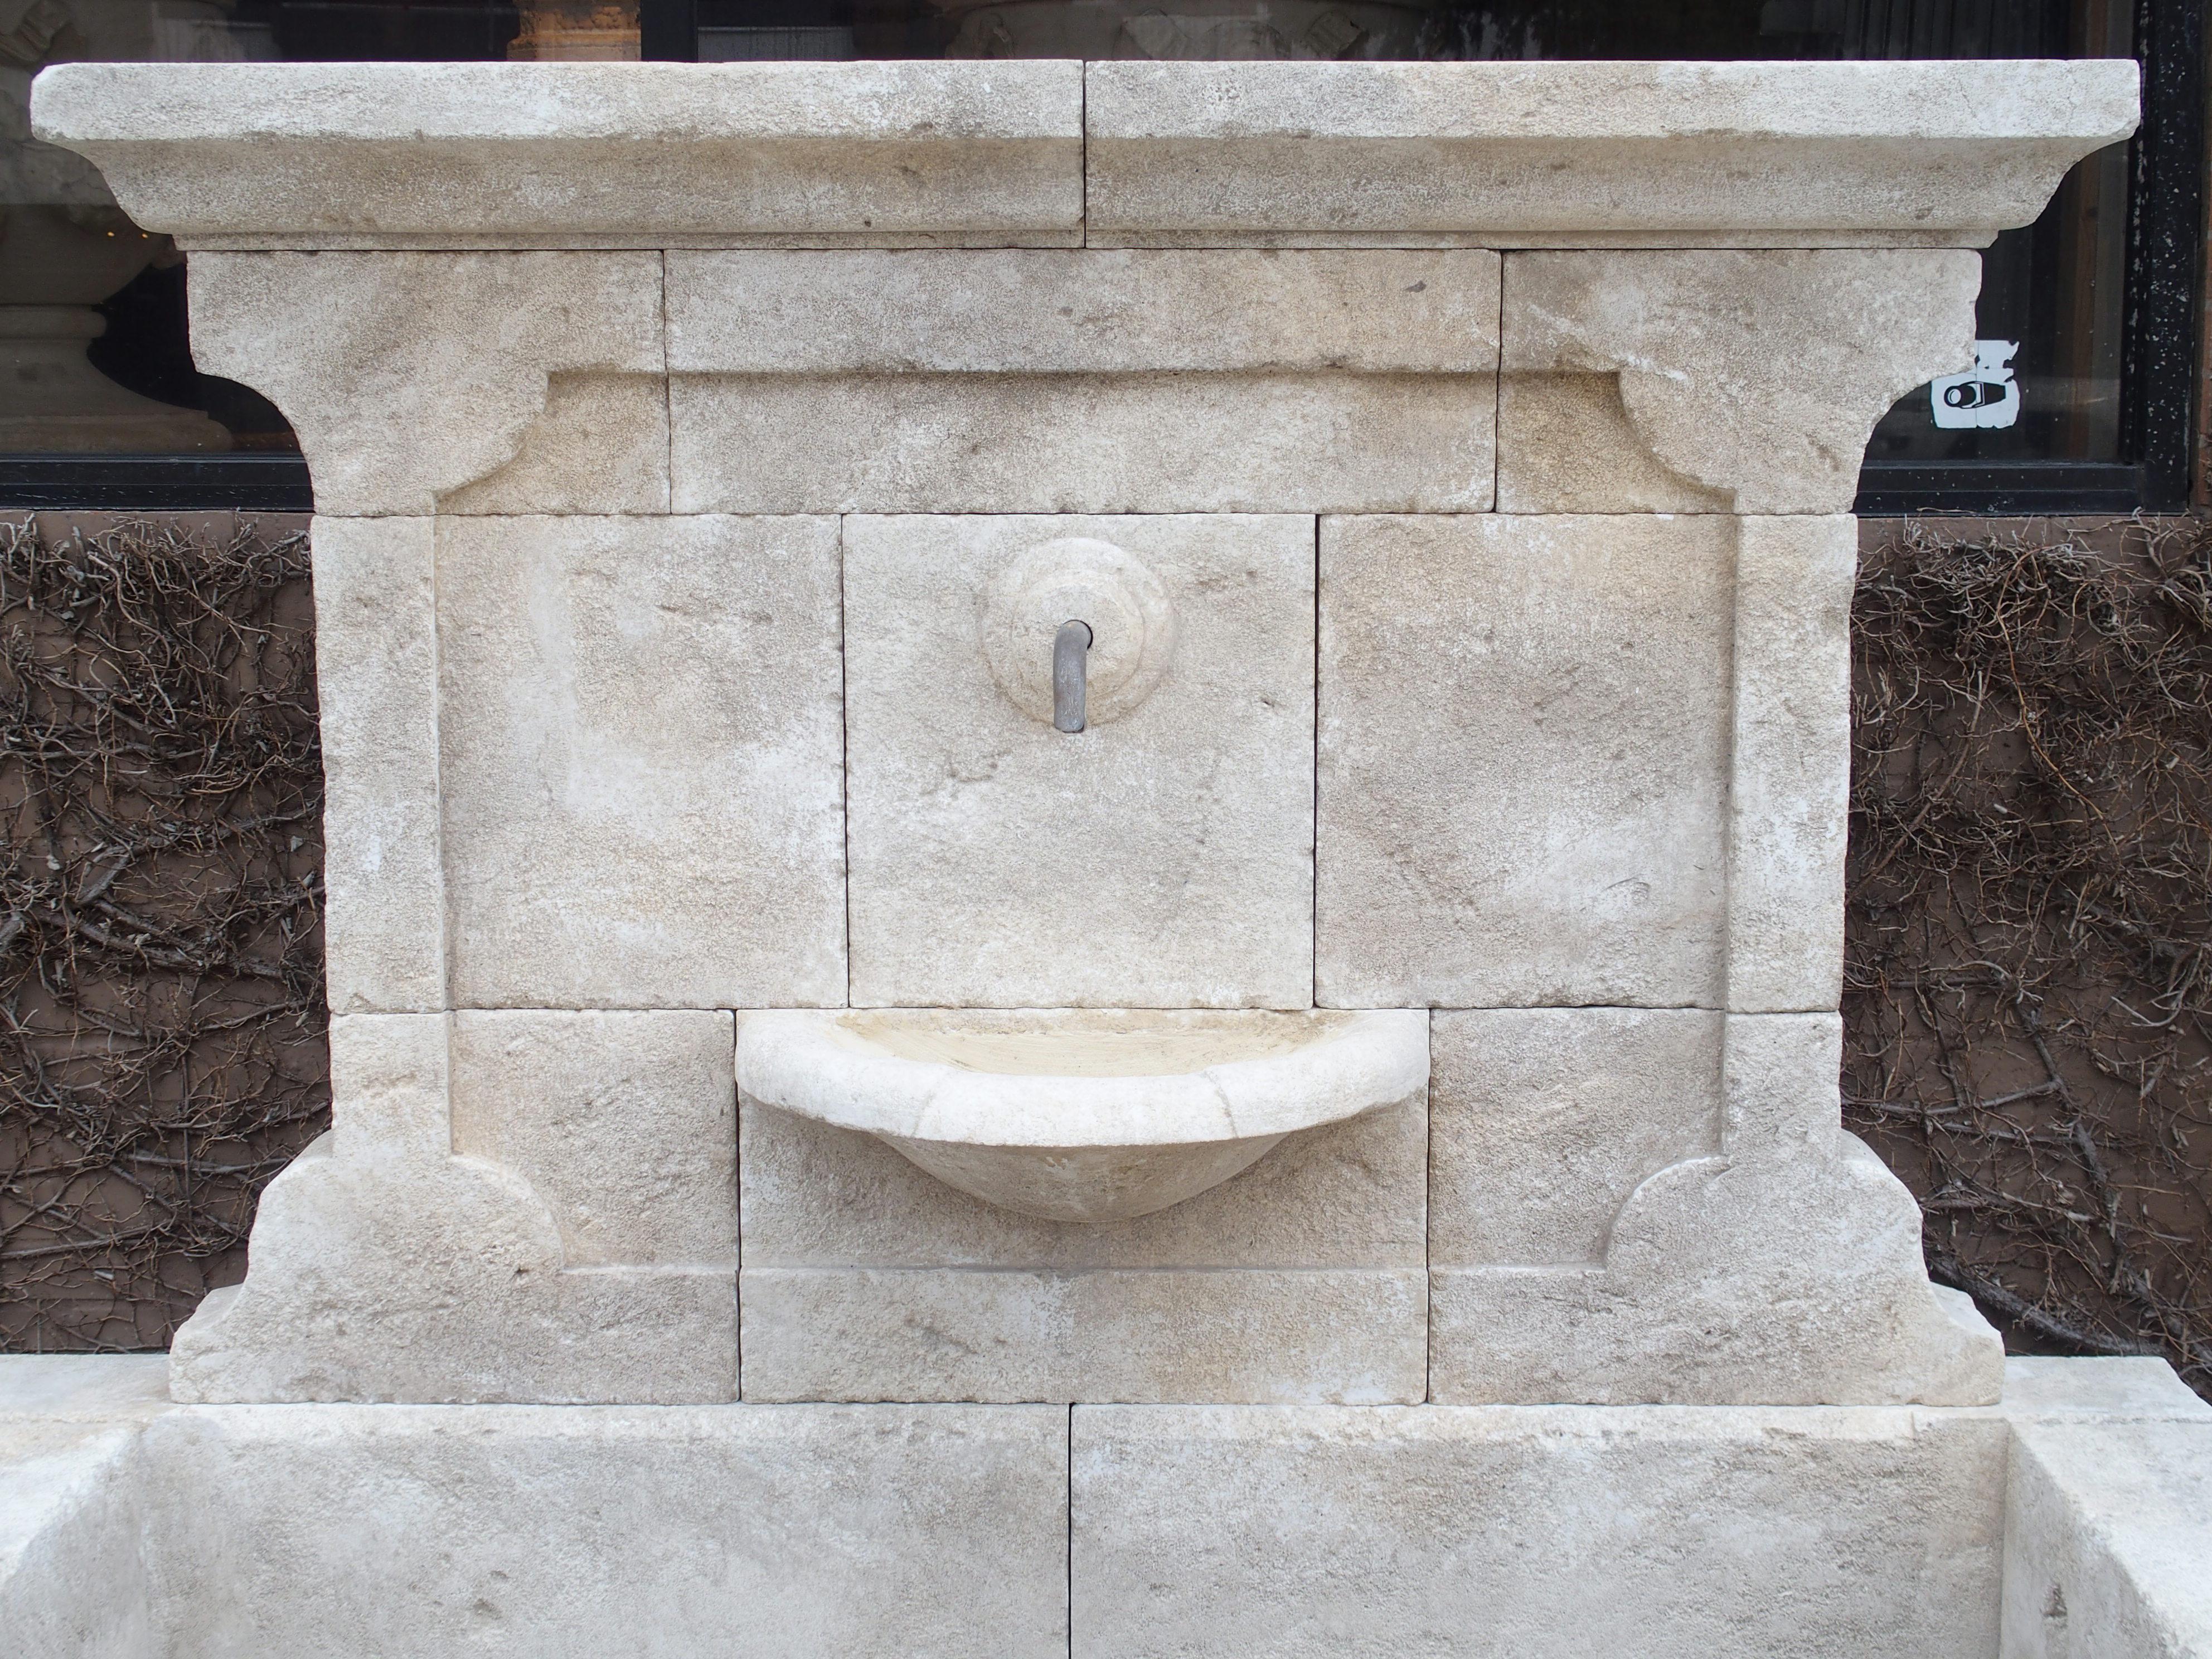 Hand-Carved Carved French Stone Wall Fountain with Cast Iron Spout and Spill Bowl